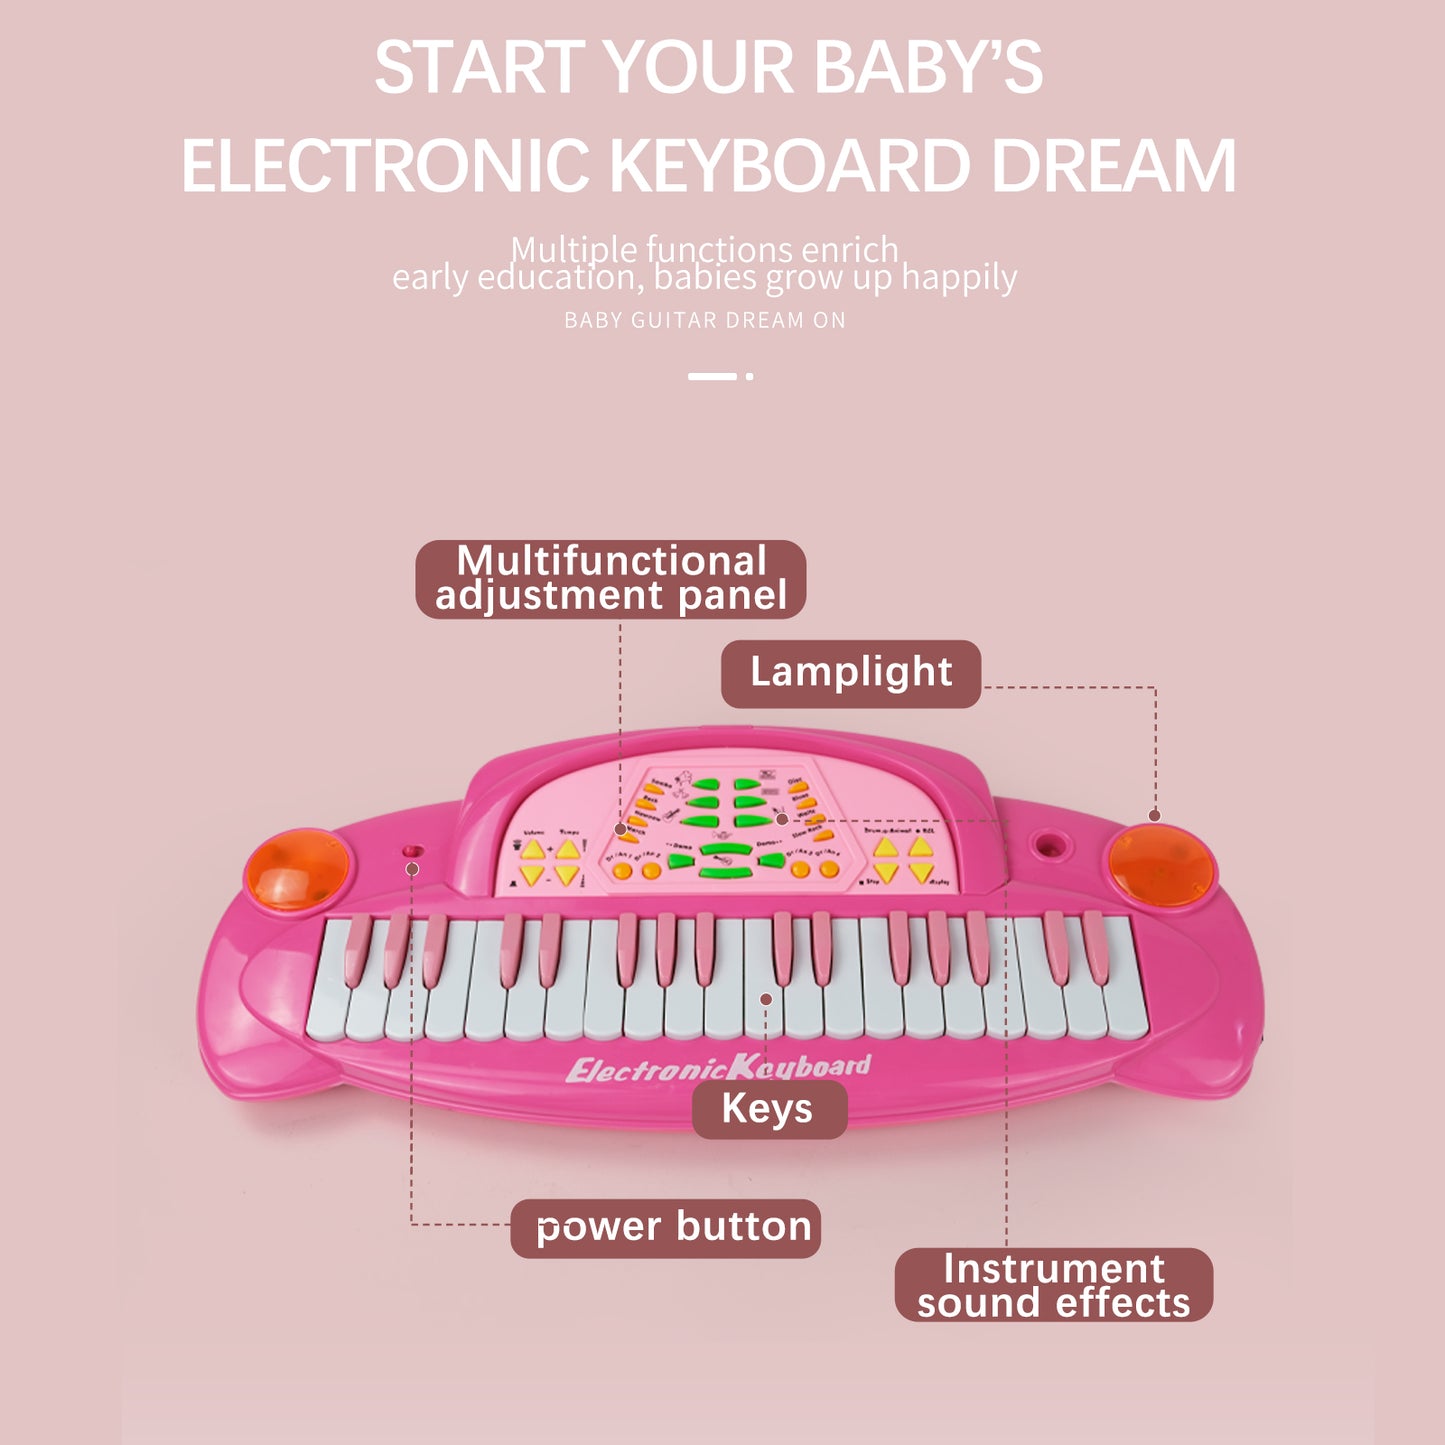 AOQIMITENJOY Musical Instrument Electronic 31 Keys Keyboard Toys with BracketLED Lighting Children's Toys Birthday Gifts for Boys and Girls 3 Year Old+ HK-5050C